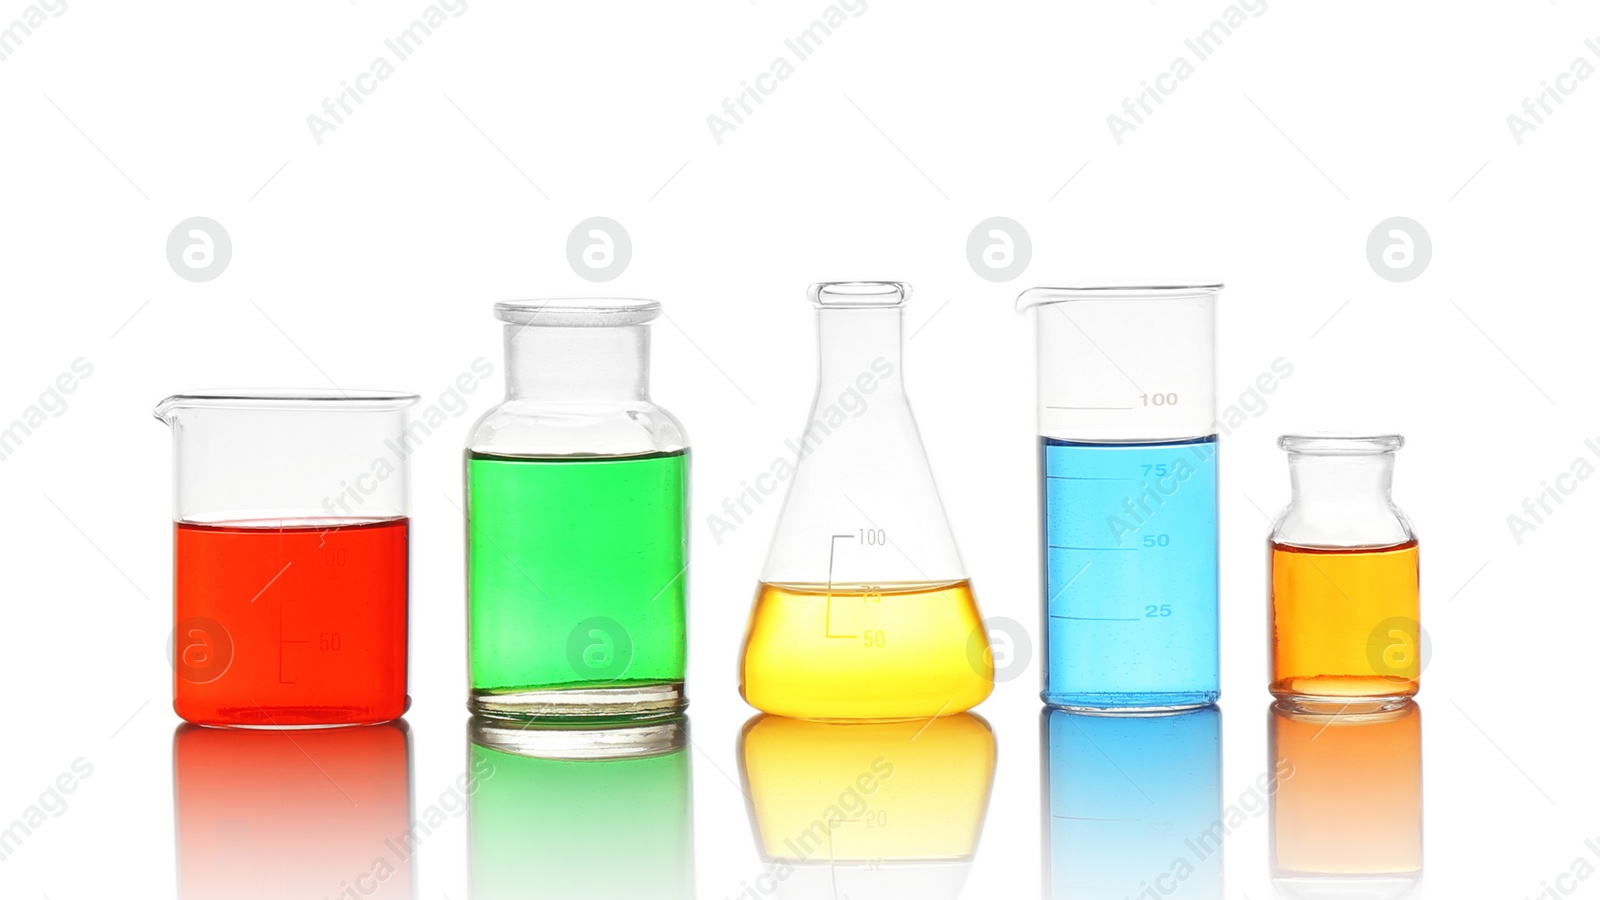 Photo of Different laboratory glassware with colorful liquids isolated on white
